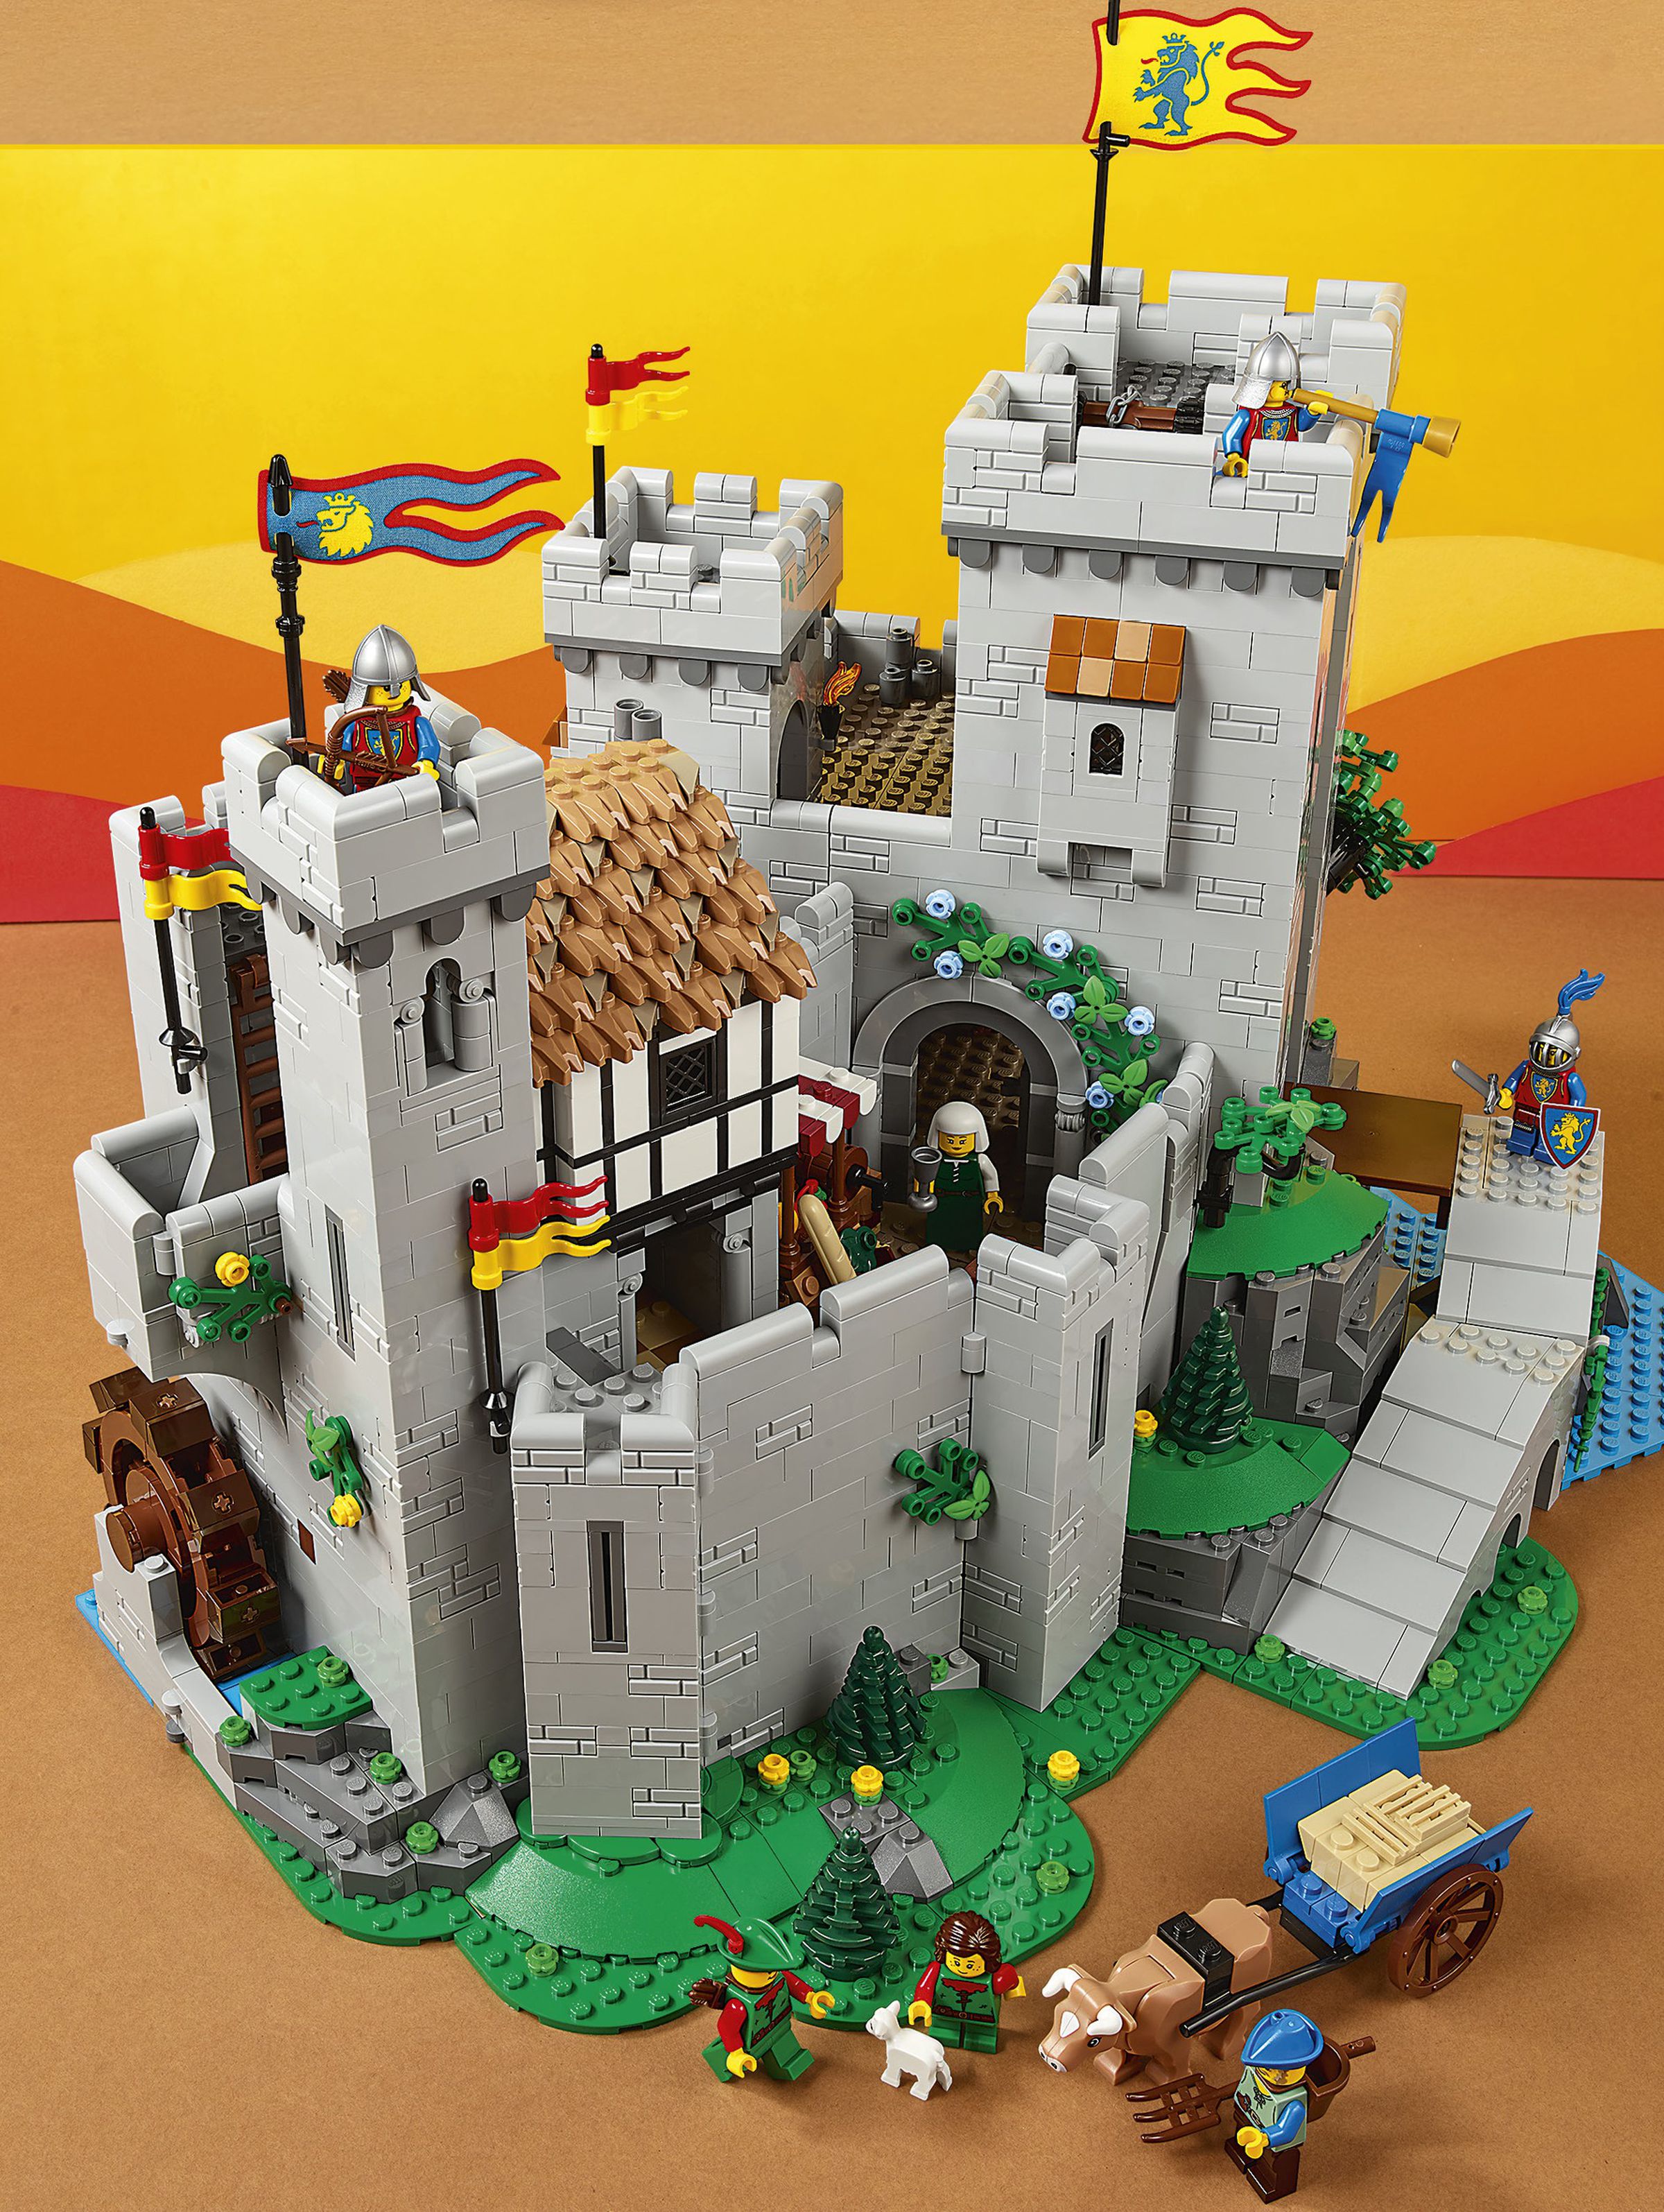 Closed, the castle is 17.5 inches / 44.5cm wide. Click here for a bigger image.